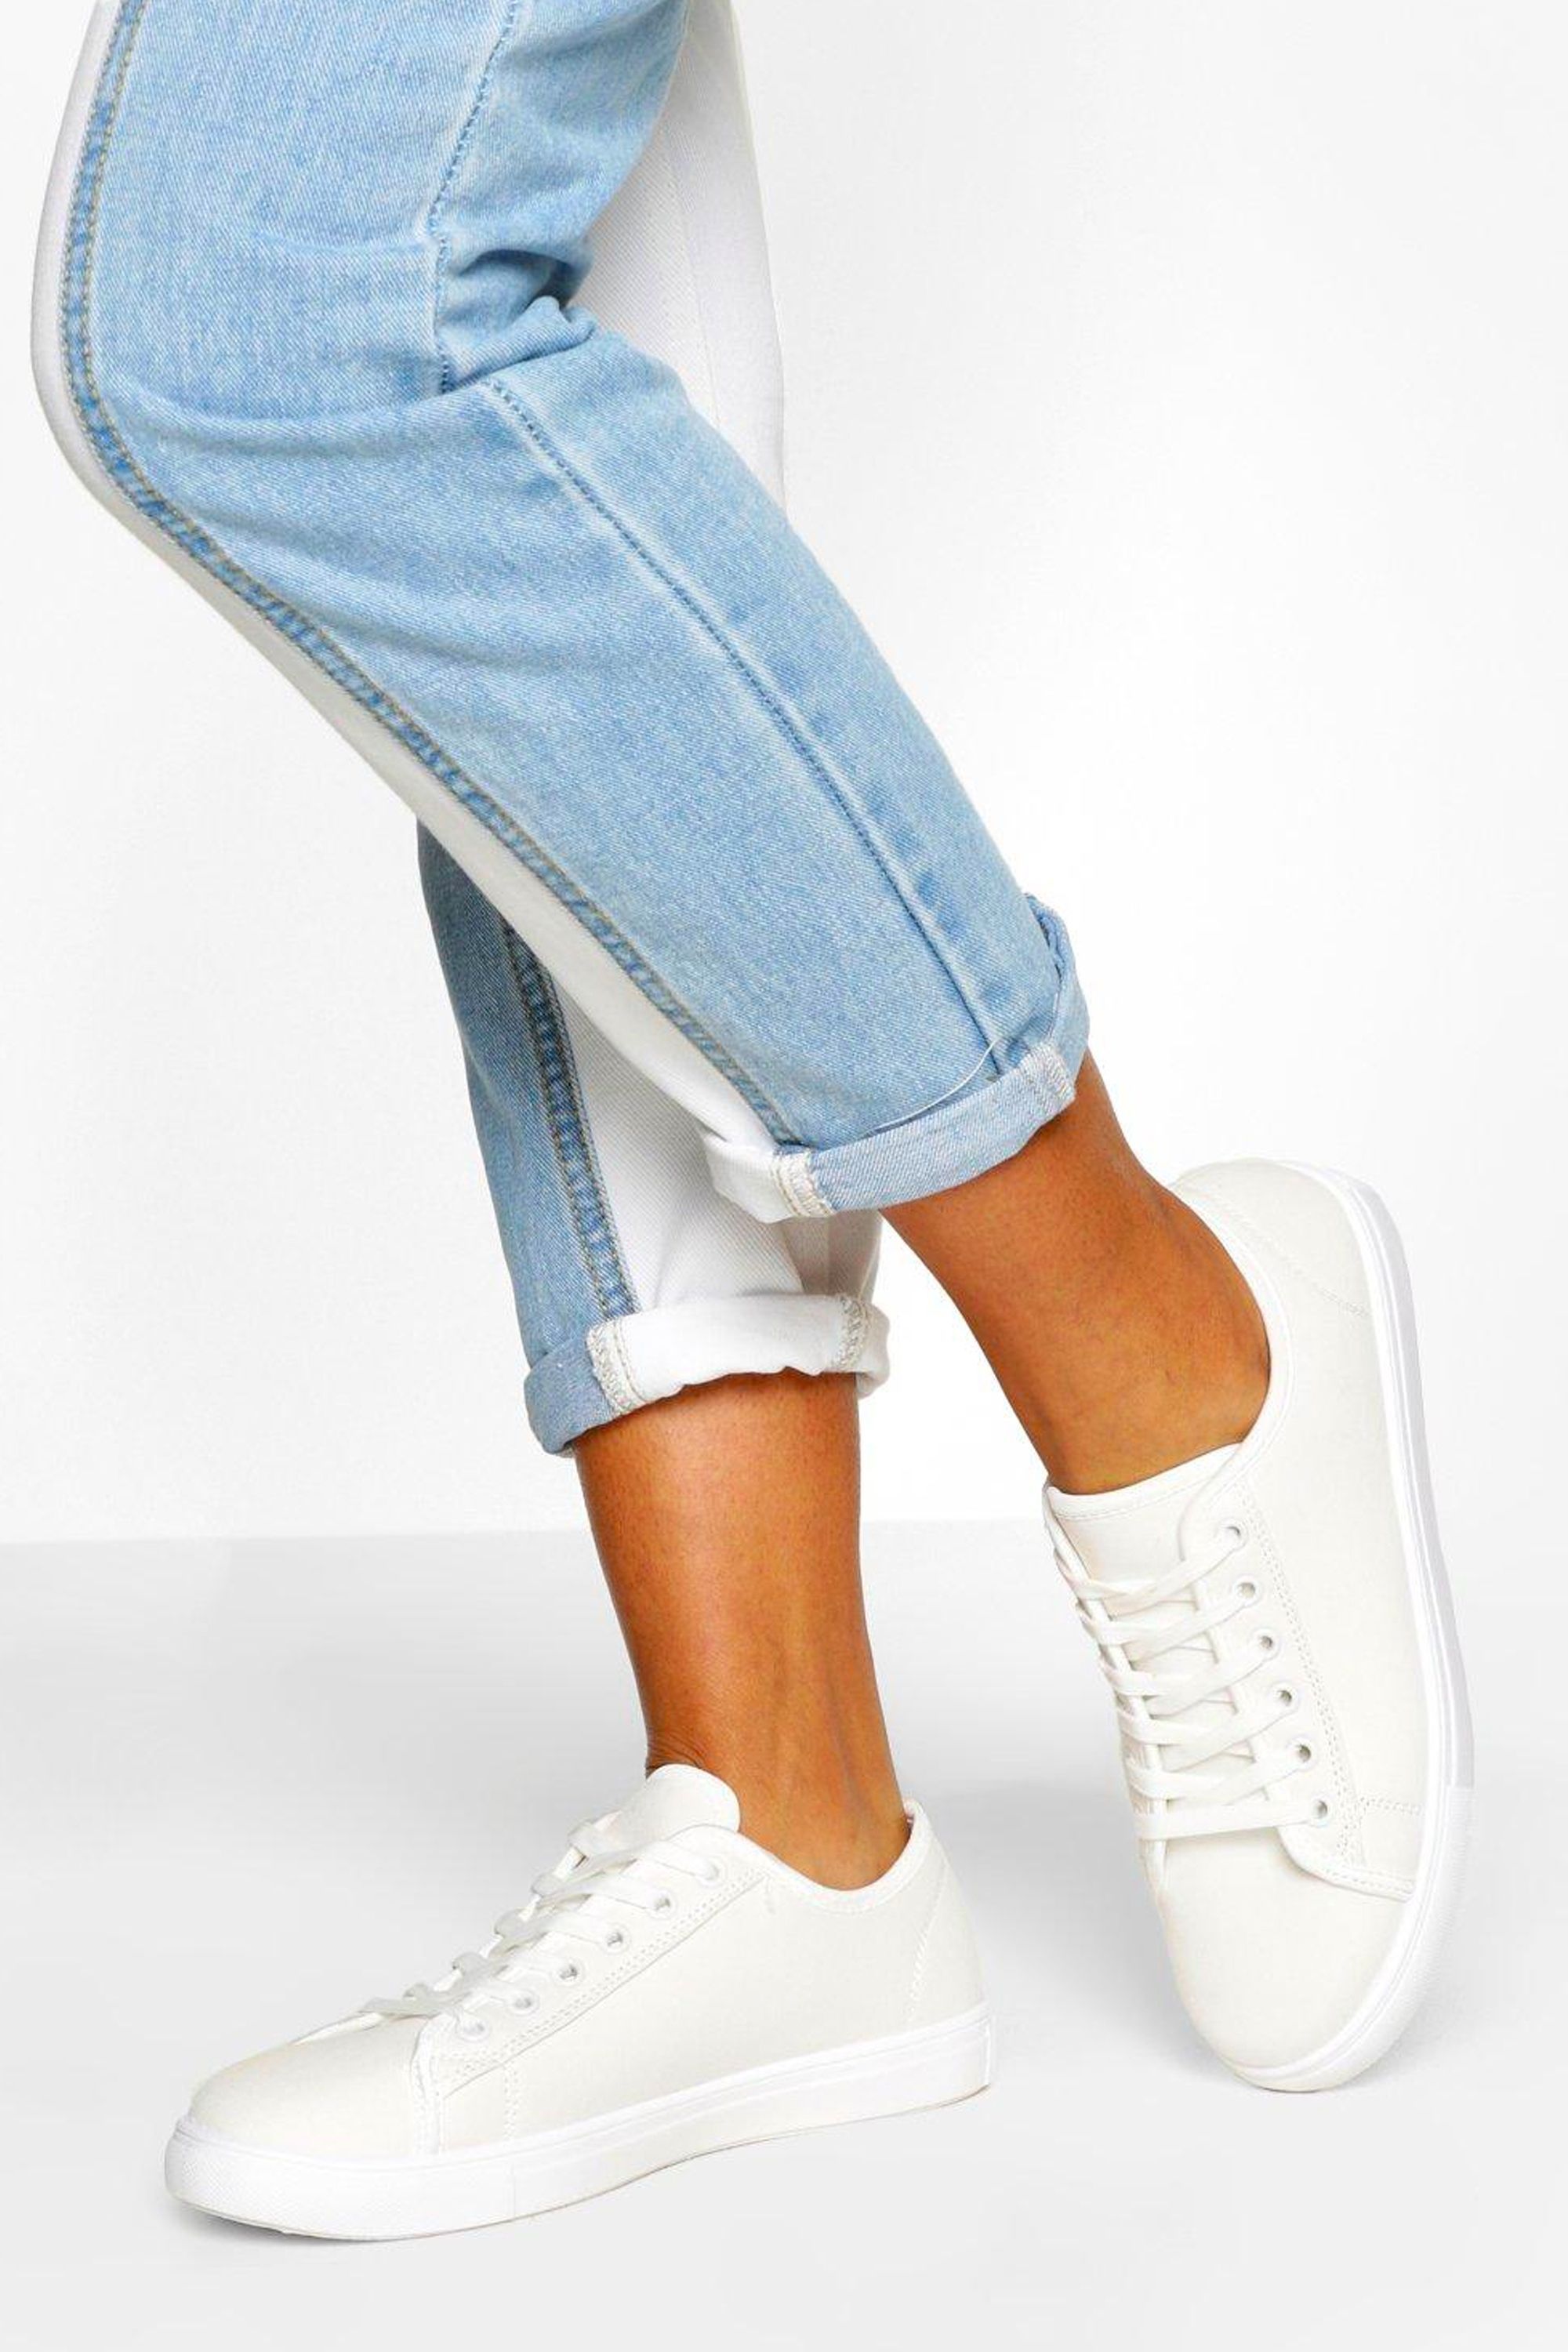 Buy > white canvas pumps wide fit > in stock